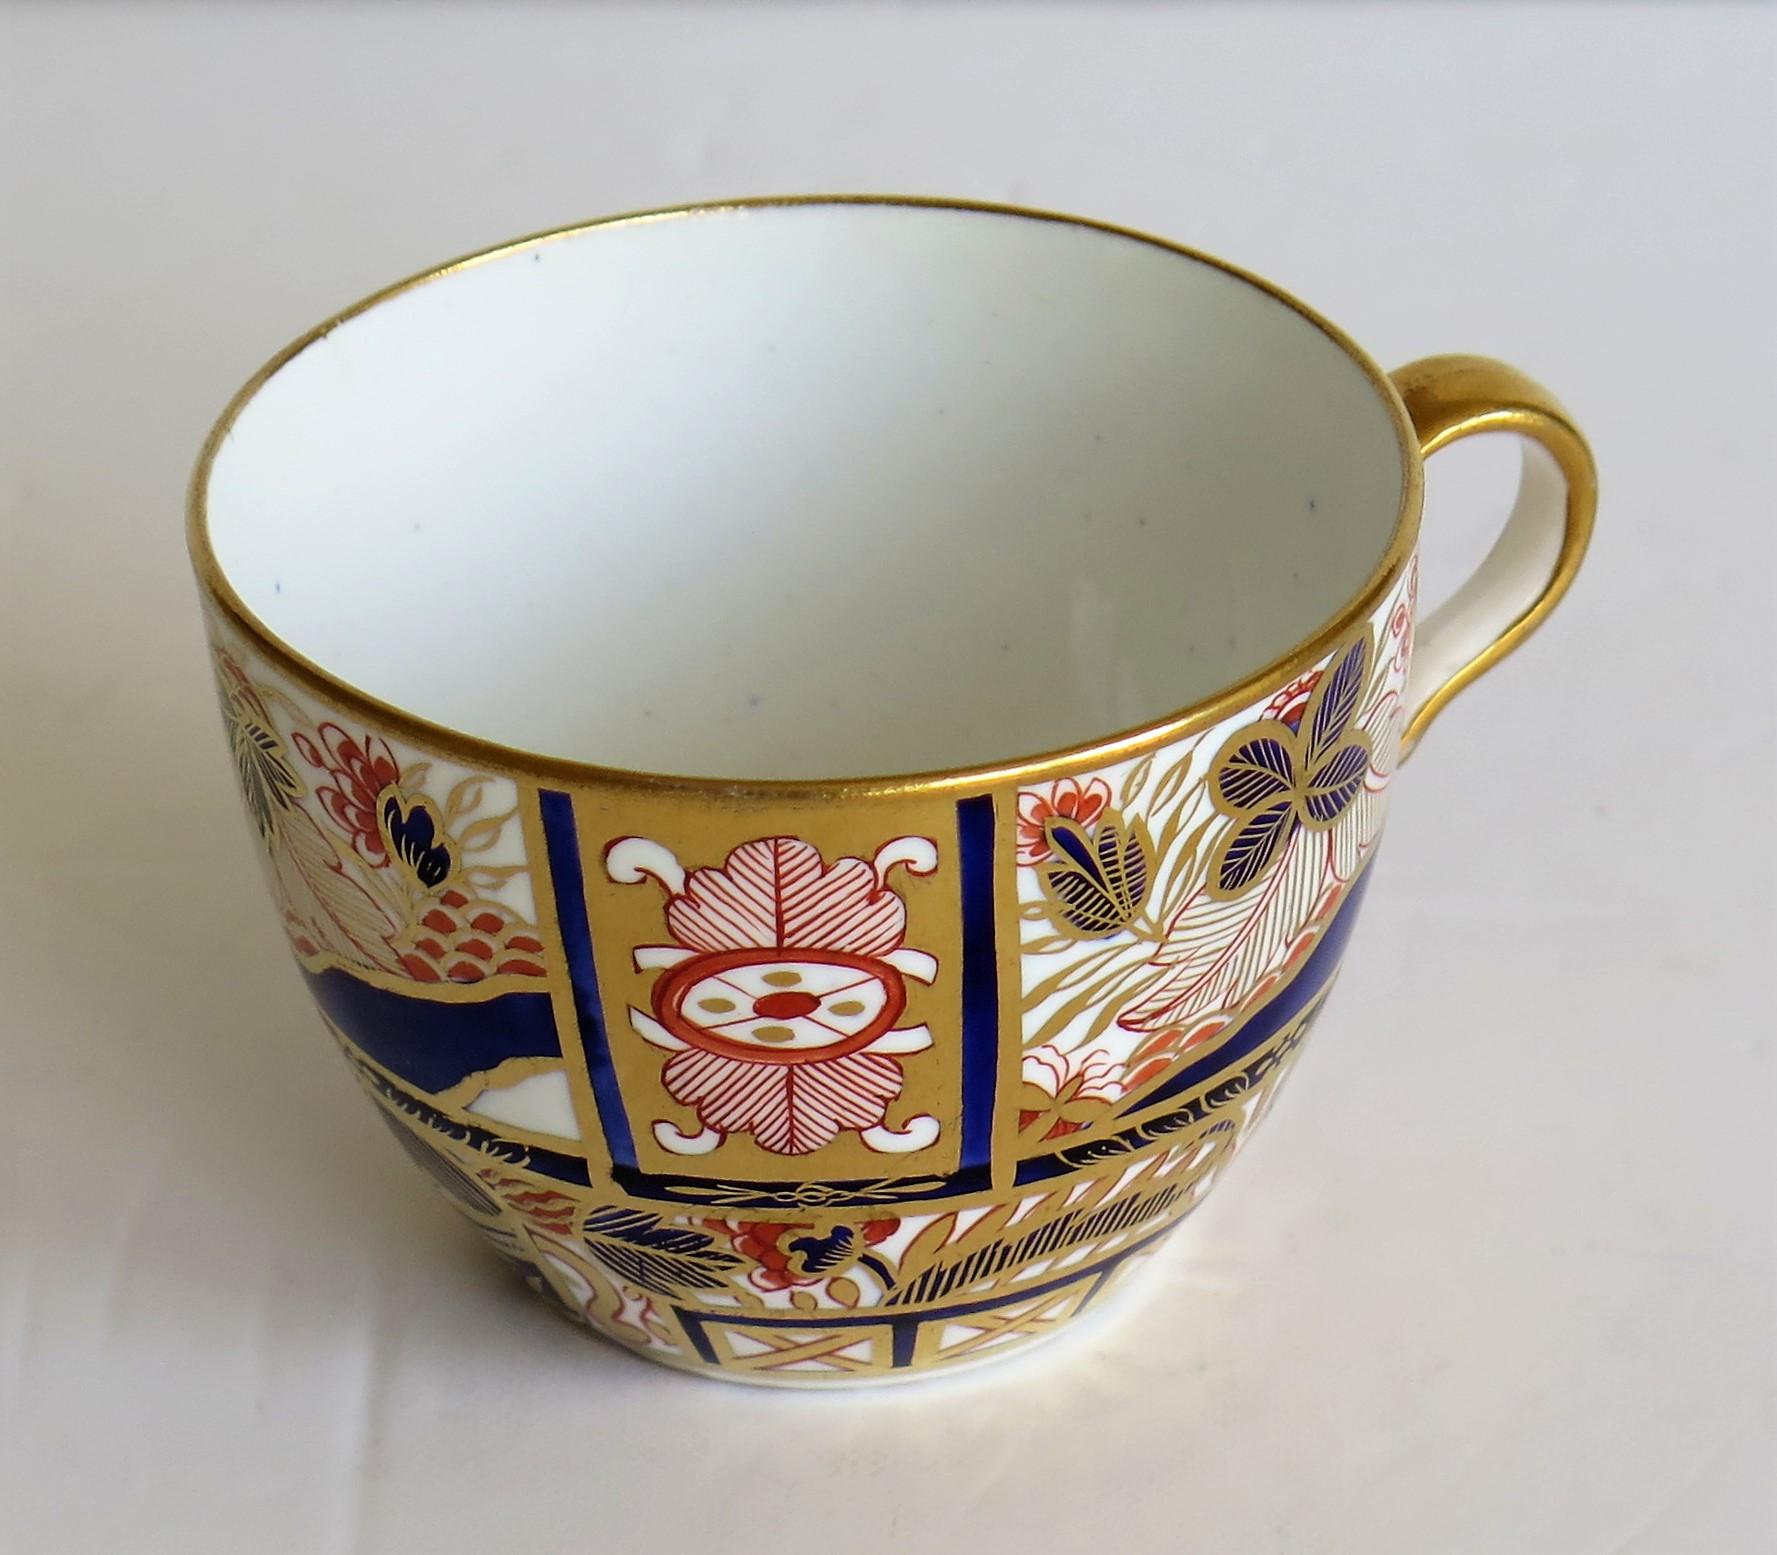 Early Spode Porcelain Tea Cup Heavily Gilded Pattern 963 Hand Painted 1